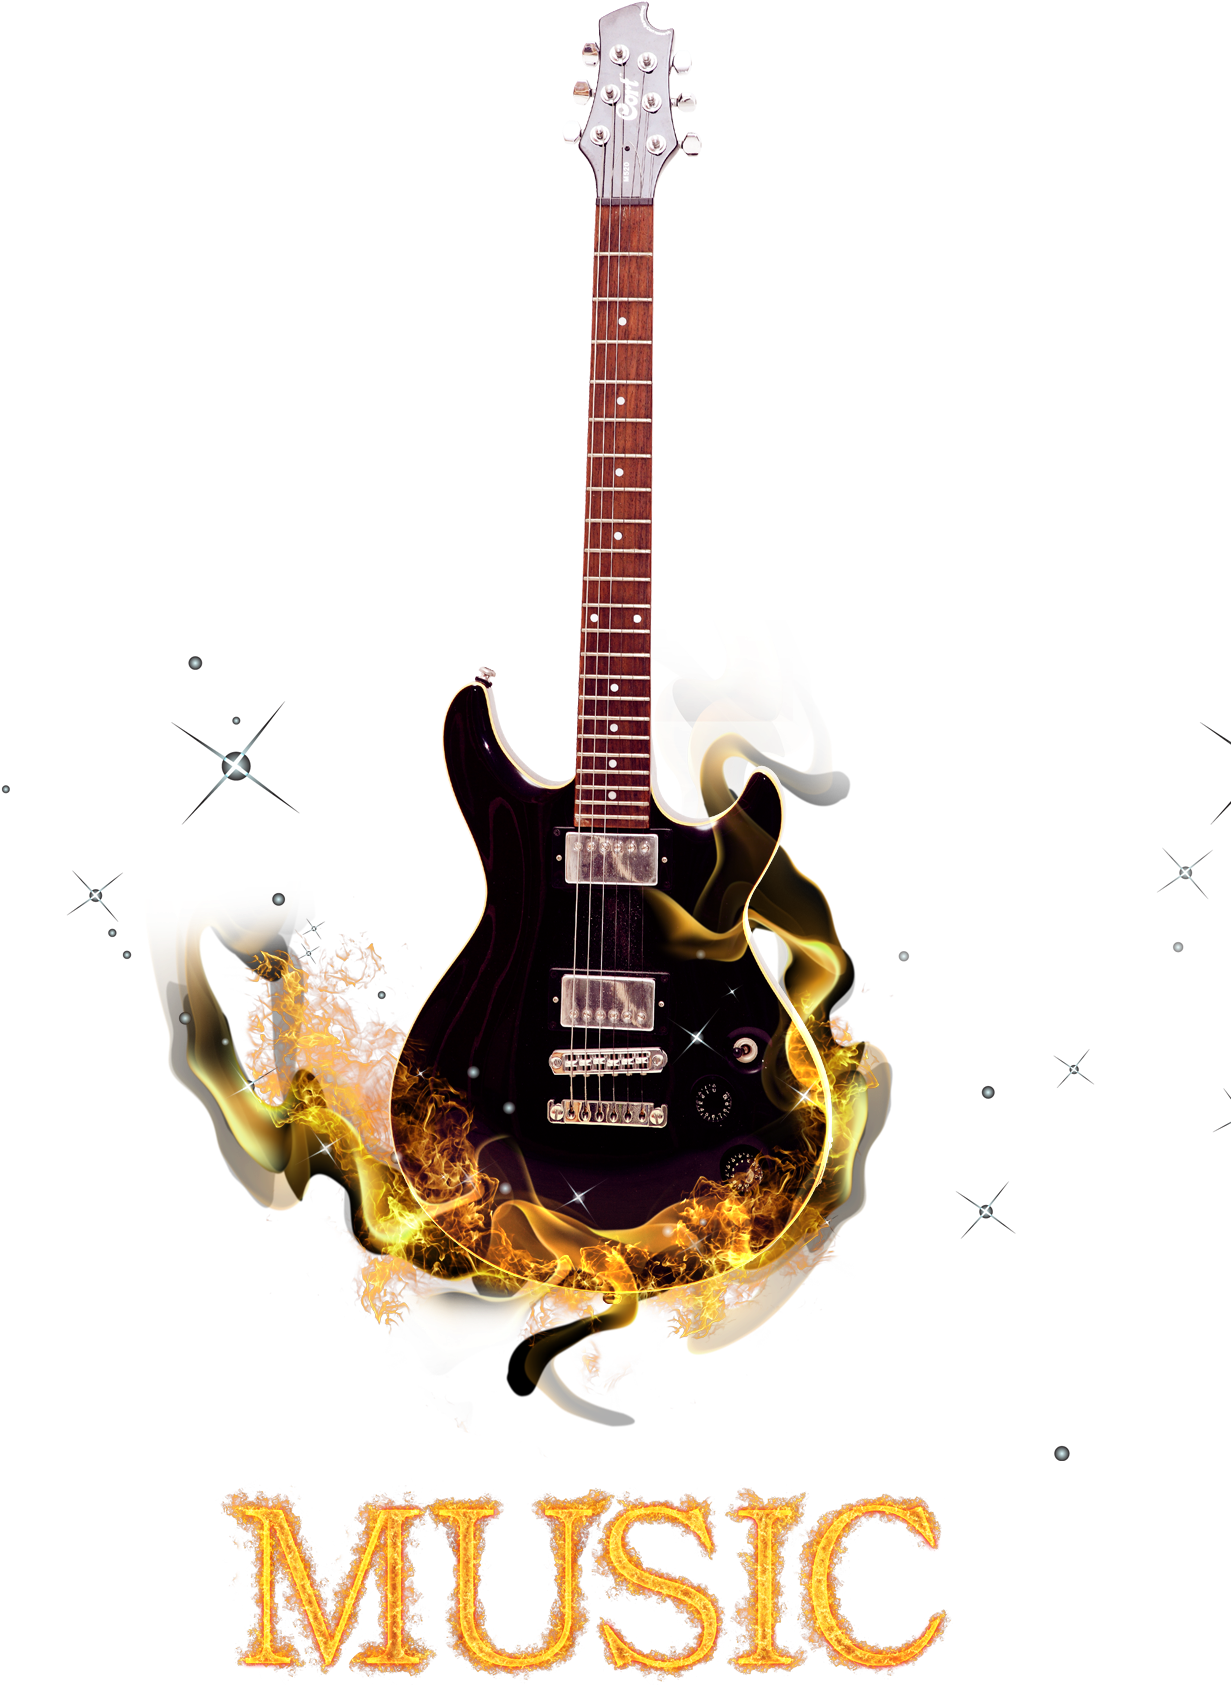 A Guitar In Flames On A Black Background